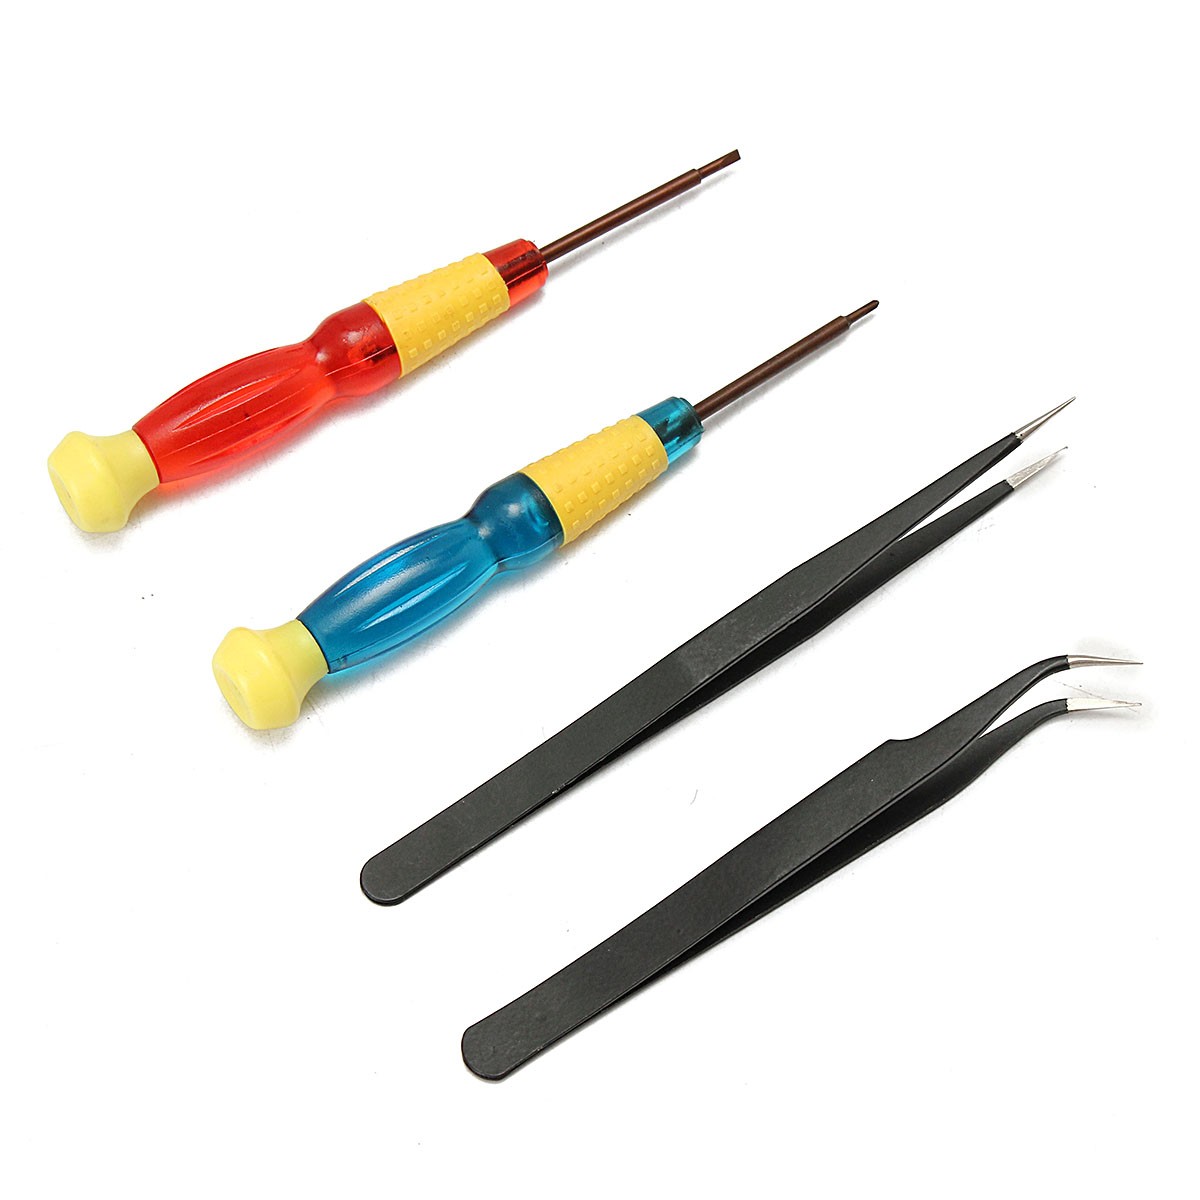 17in1-Electric-Soldering-Tools-Kit-Set-Iron-Stand-Desoldering-Pump-30W-110V-1300343-6